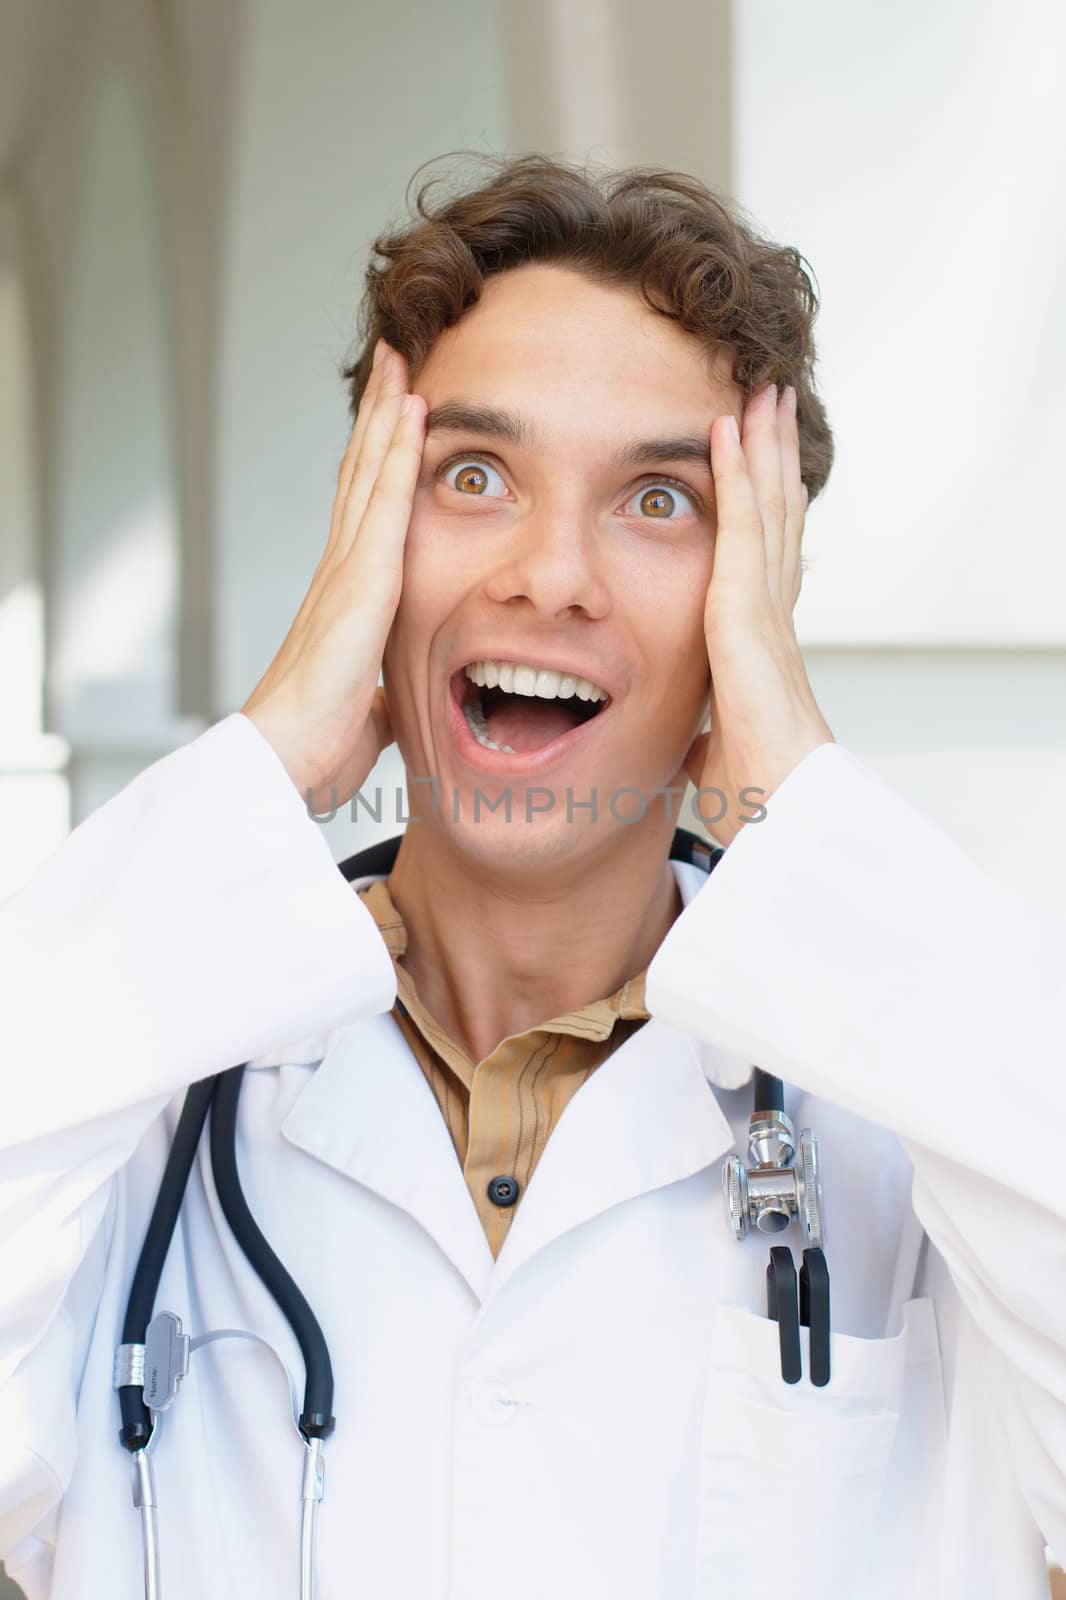 Close-up portrait of a screaming young doctor